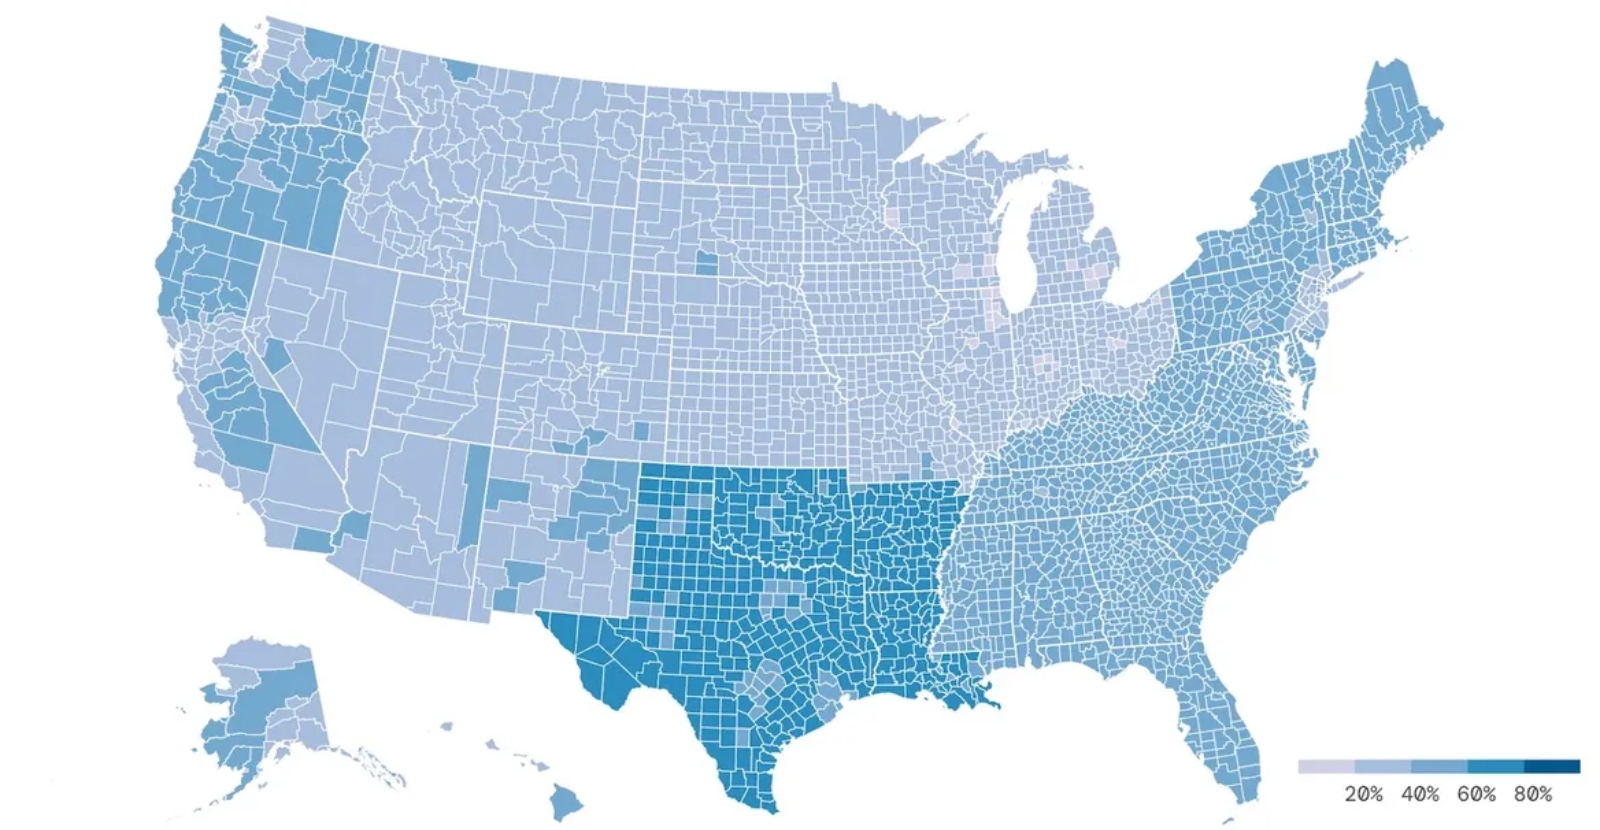 A map of the US with a blue grid showing percentages between 20 and 80%.